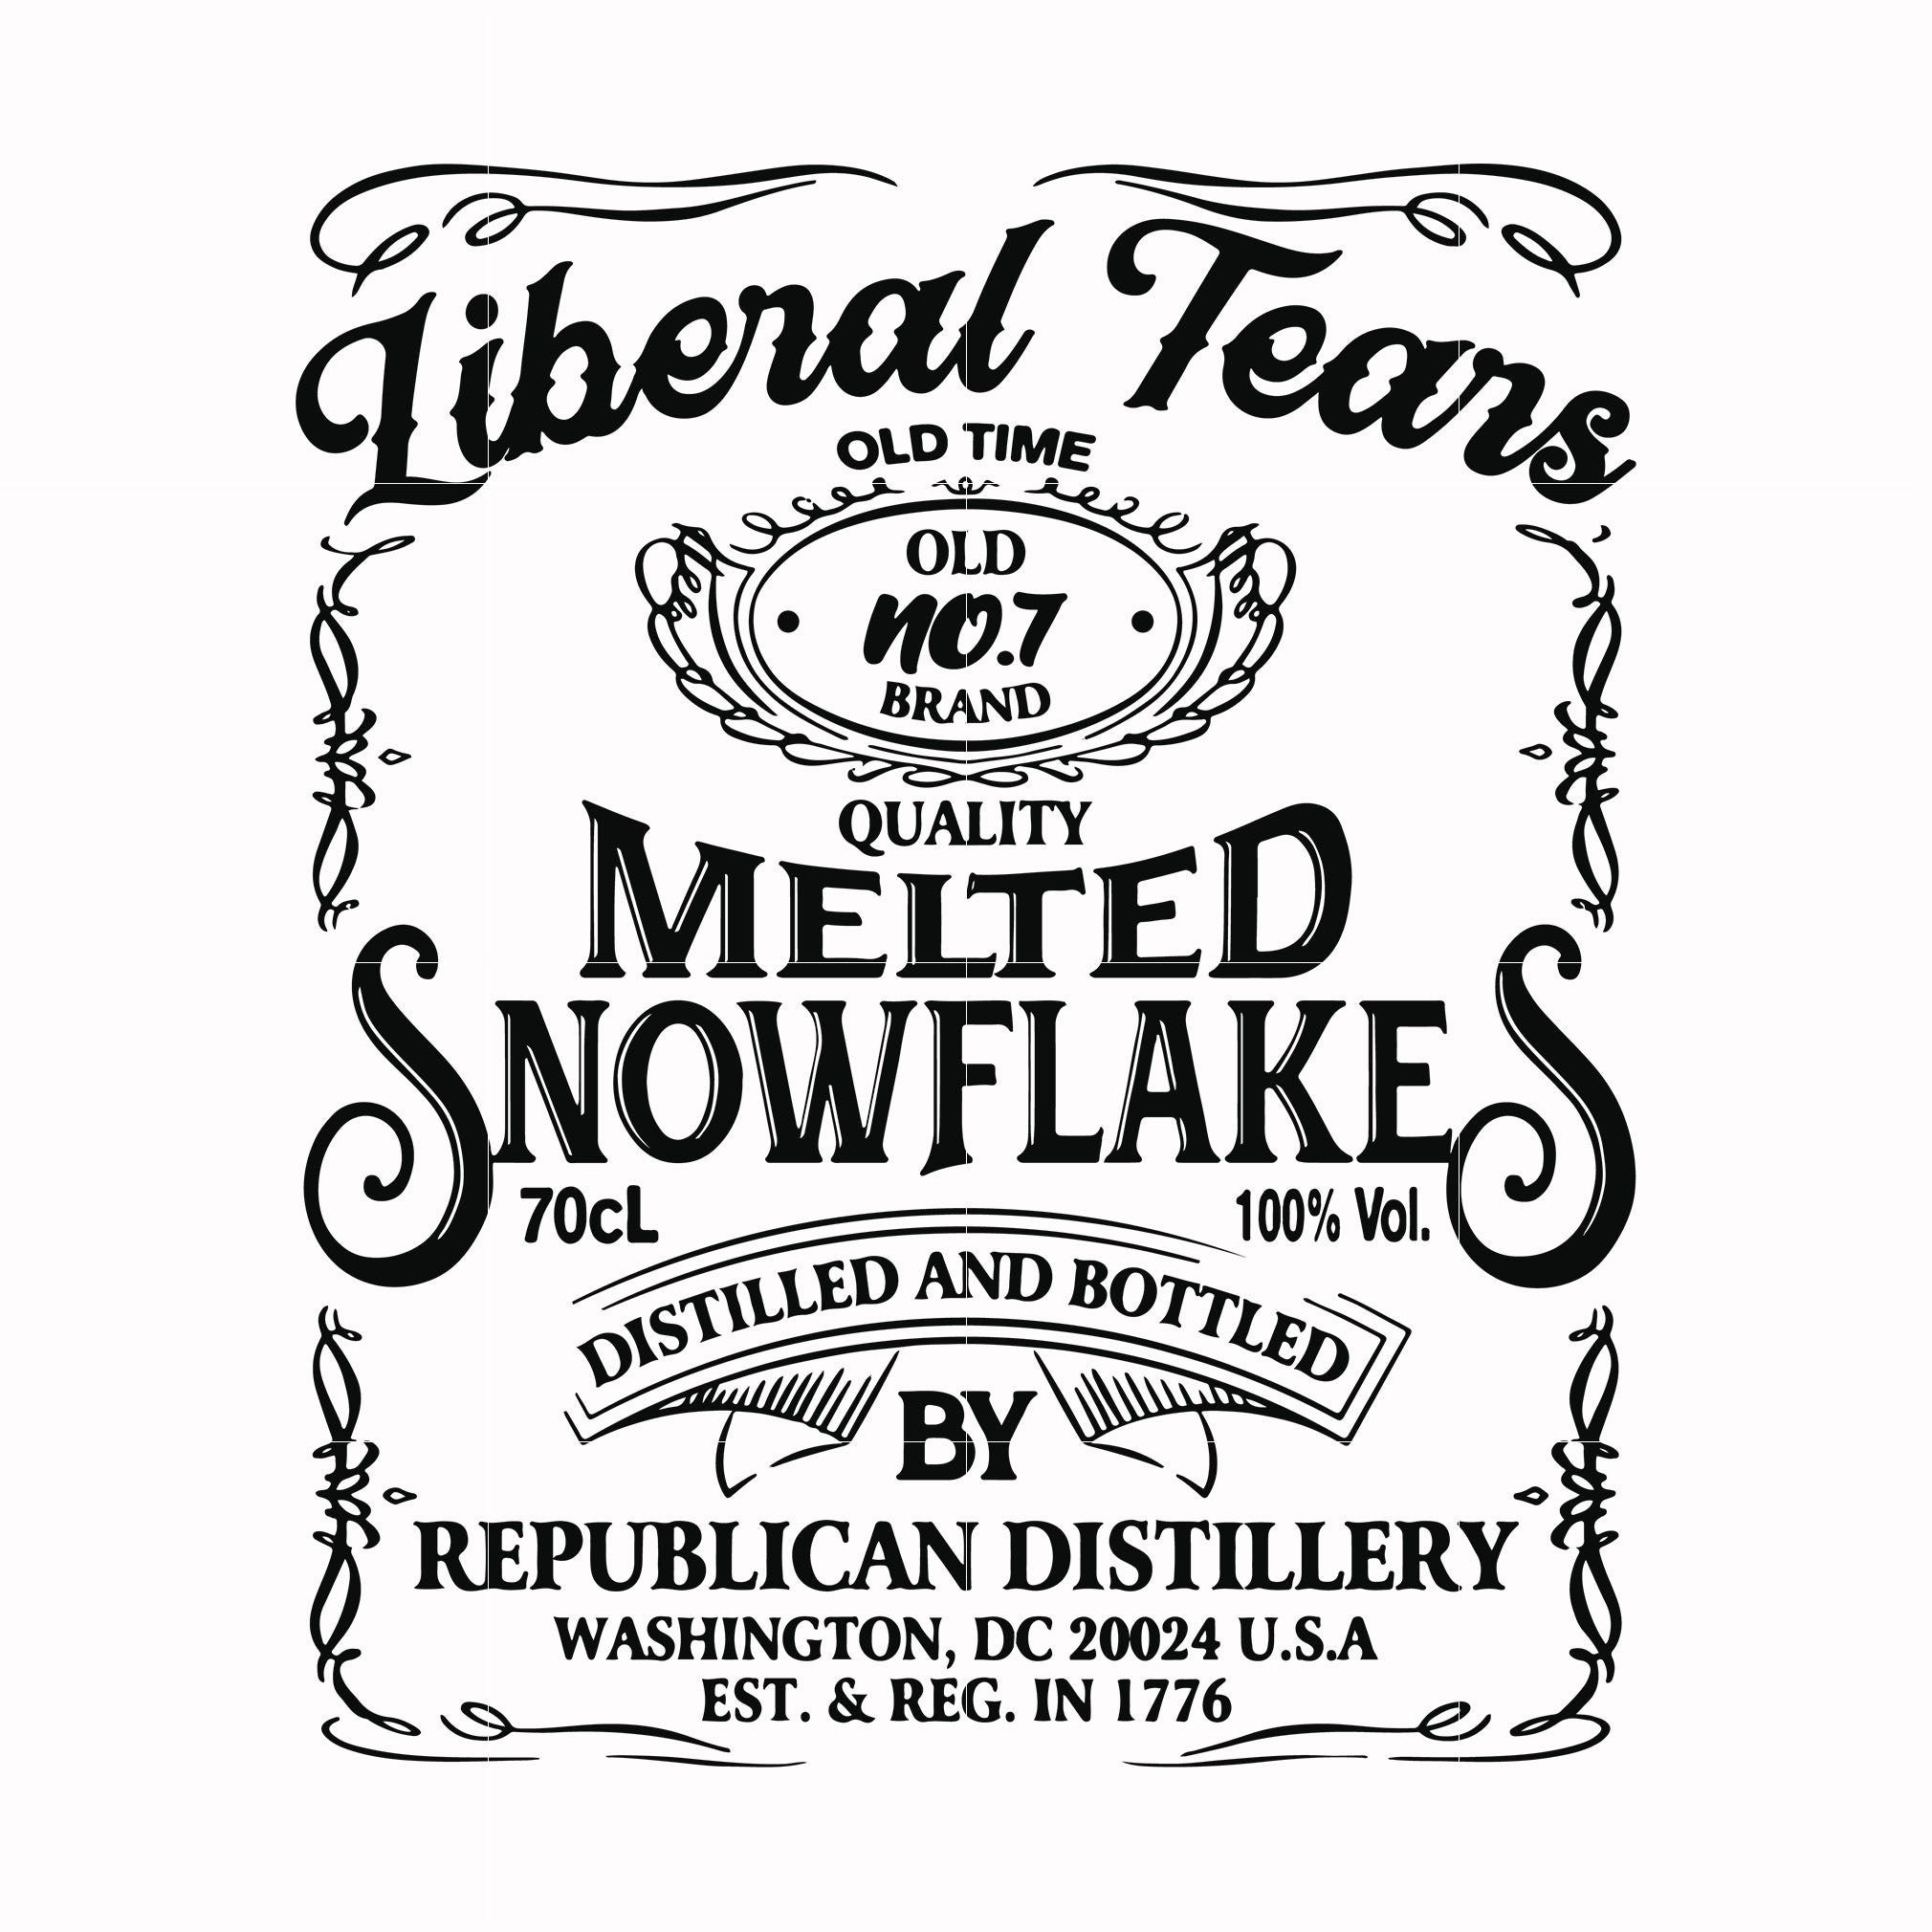 Liberal Tears Old Time Quality Melted Snowflakes Distilled And Bottled By Republican Distillery svg, png, dxf, eps digital file TD2707205